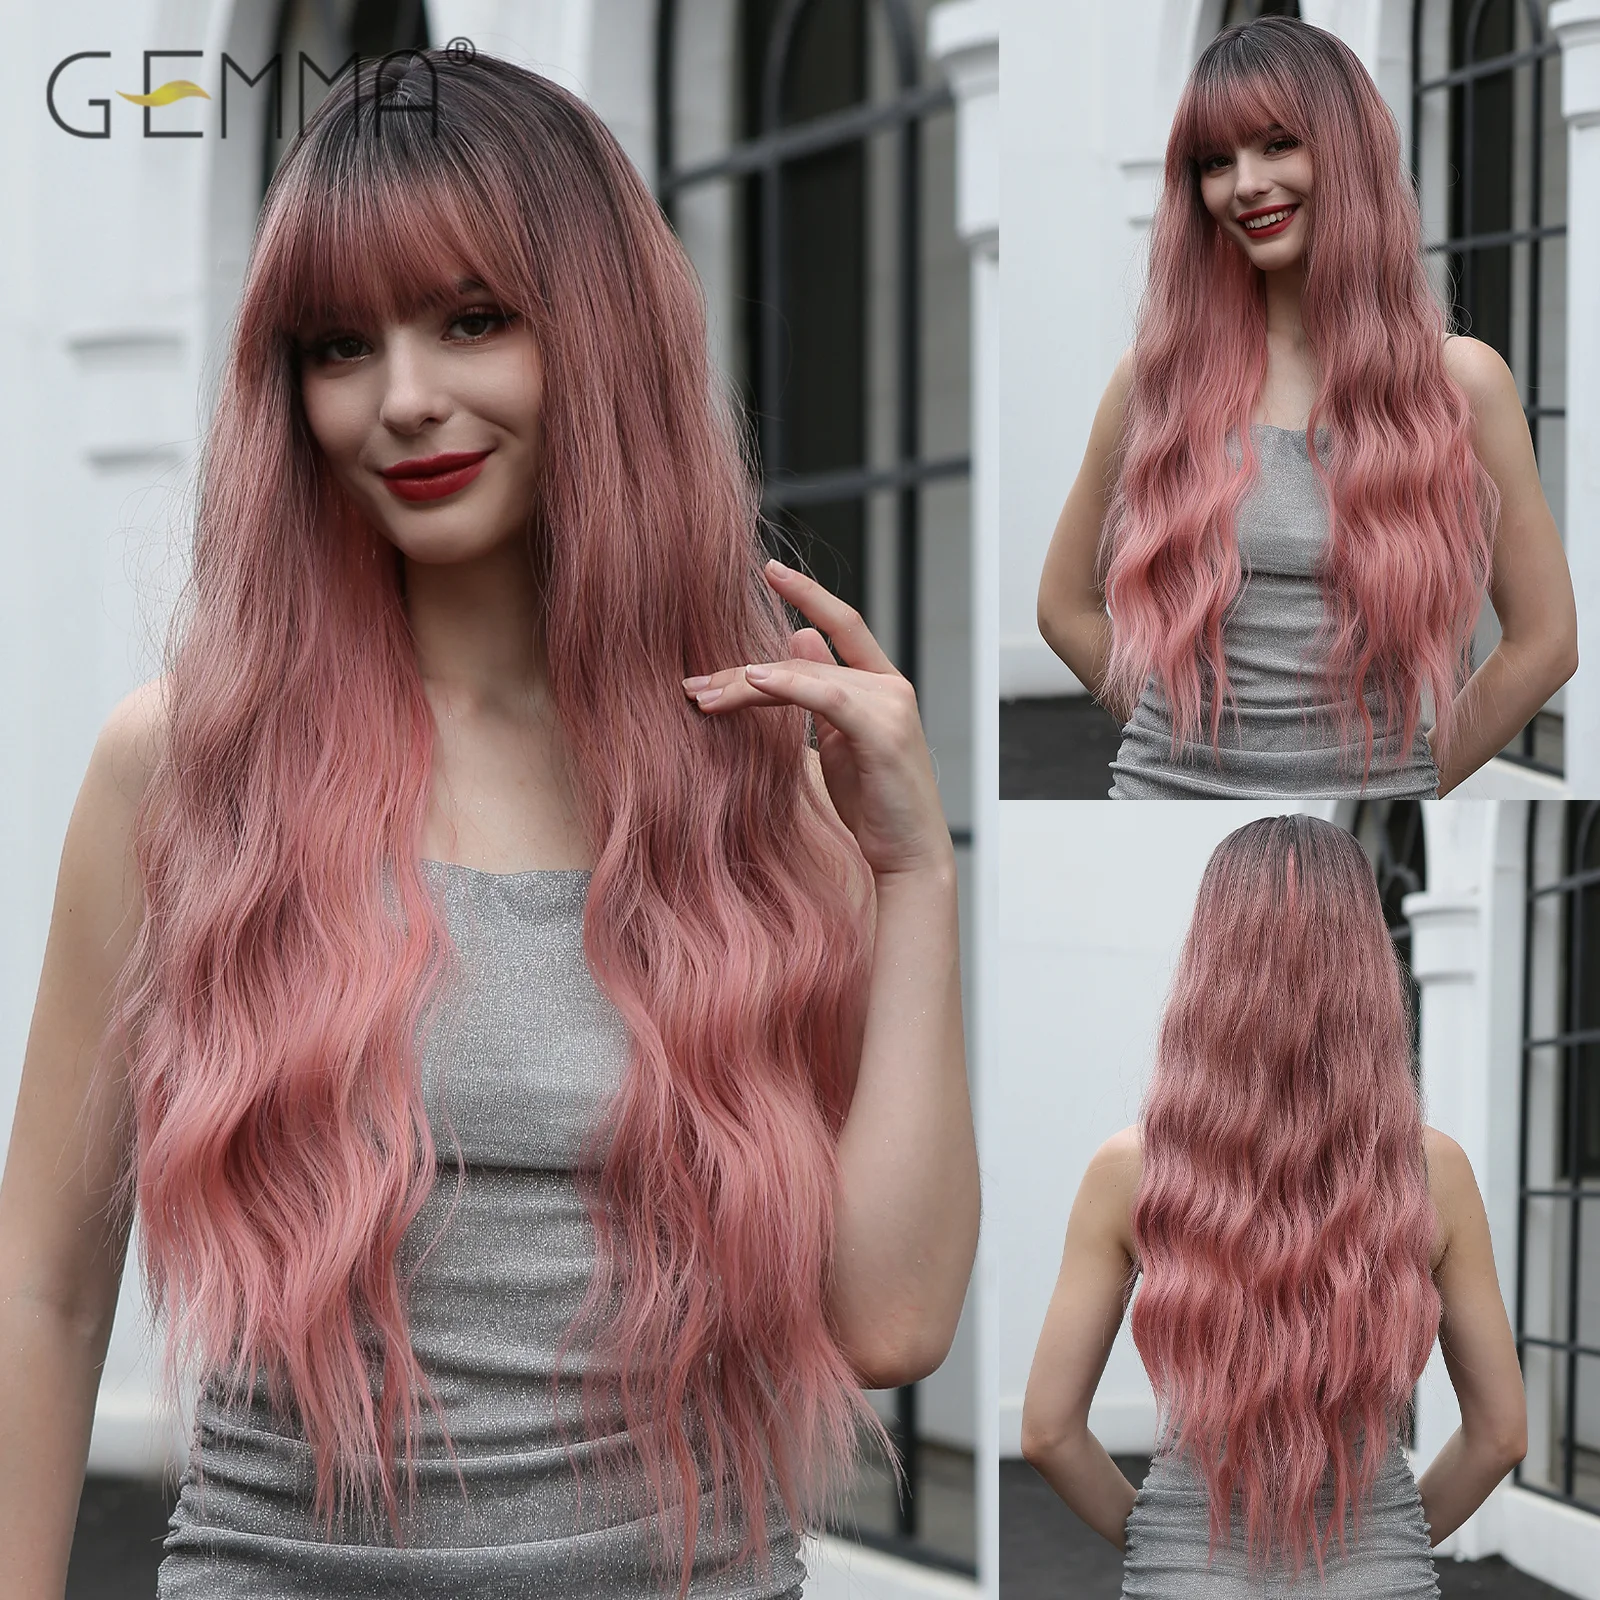 

GEMMA Pink Ombre Synthetic Wavy Wig with Bangs Long Curly Wigs for Women Natural Cosplay Party Hair Wig Heat Resistant Fibre